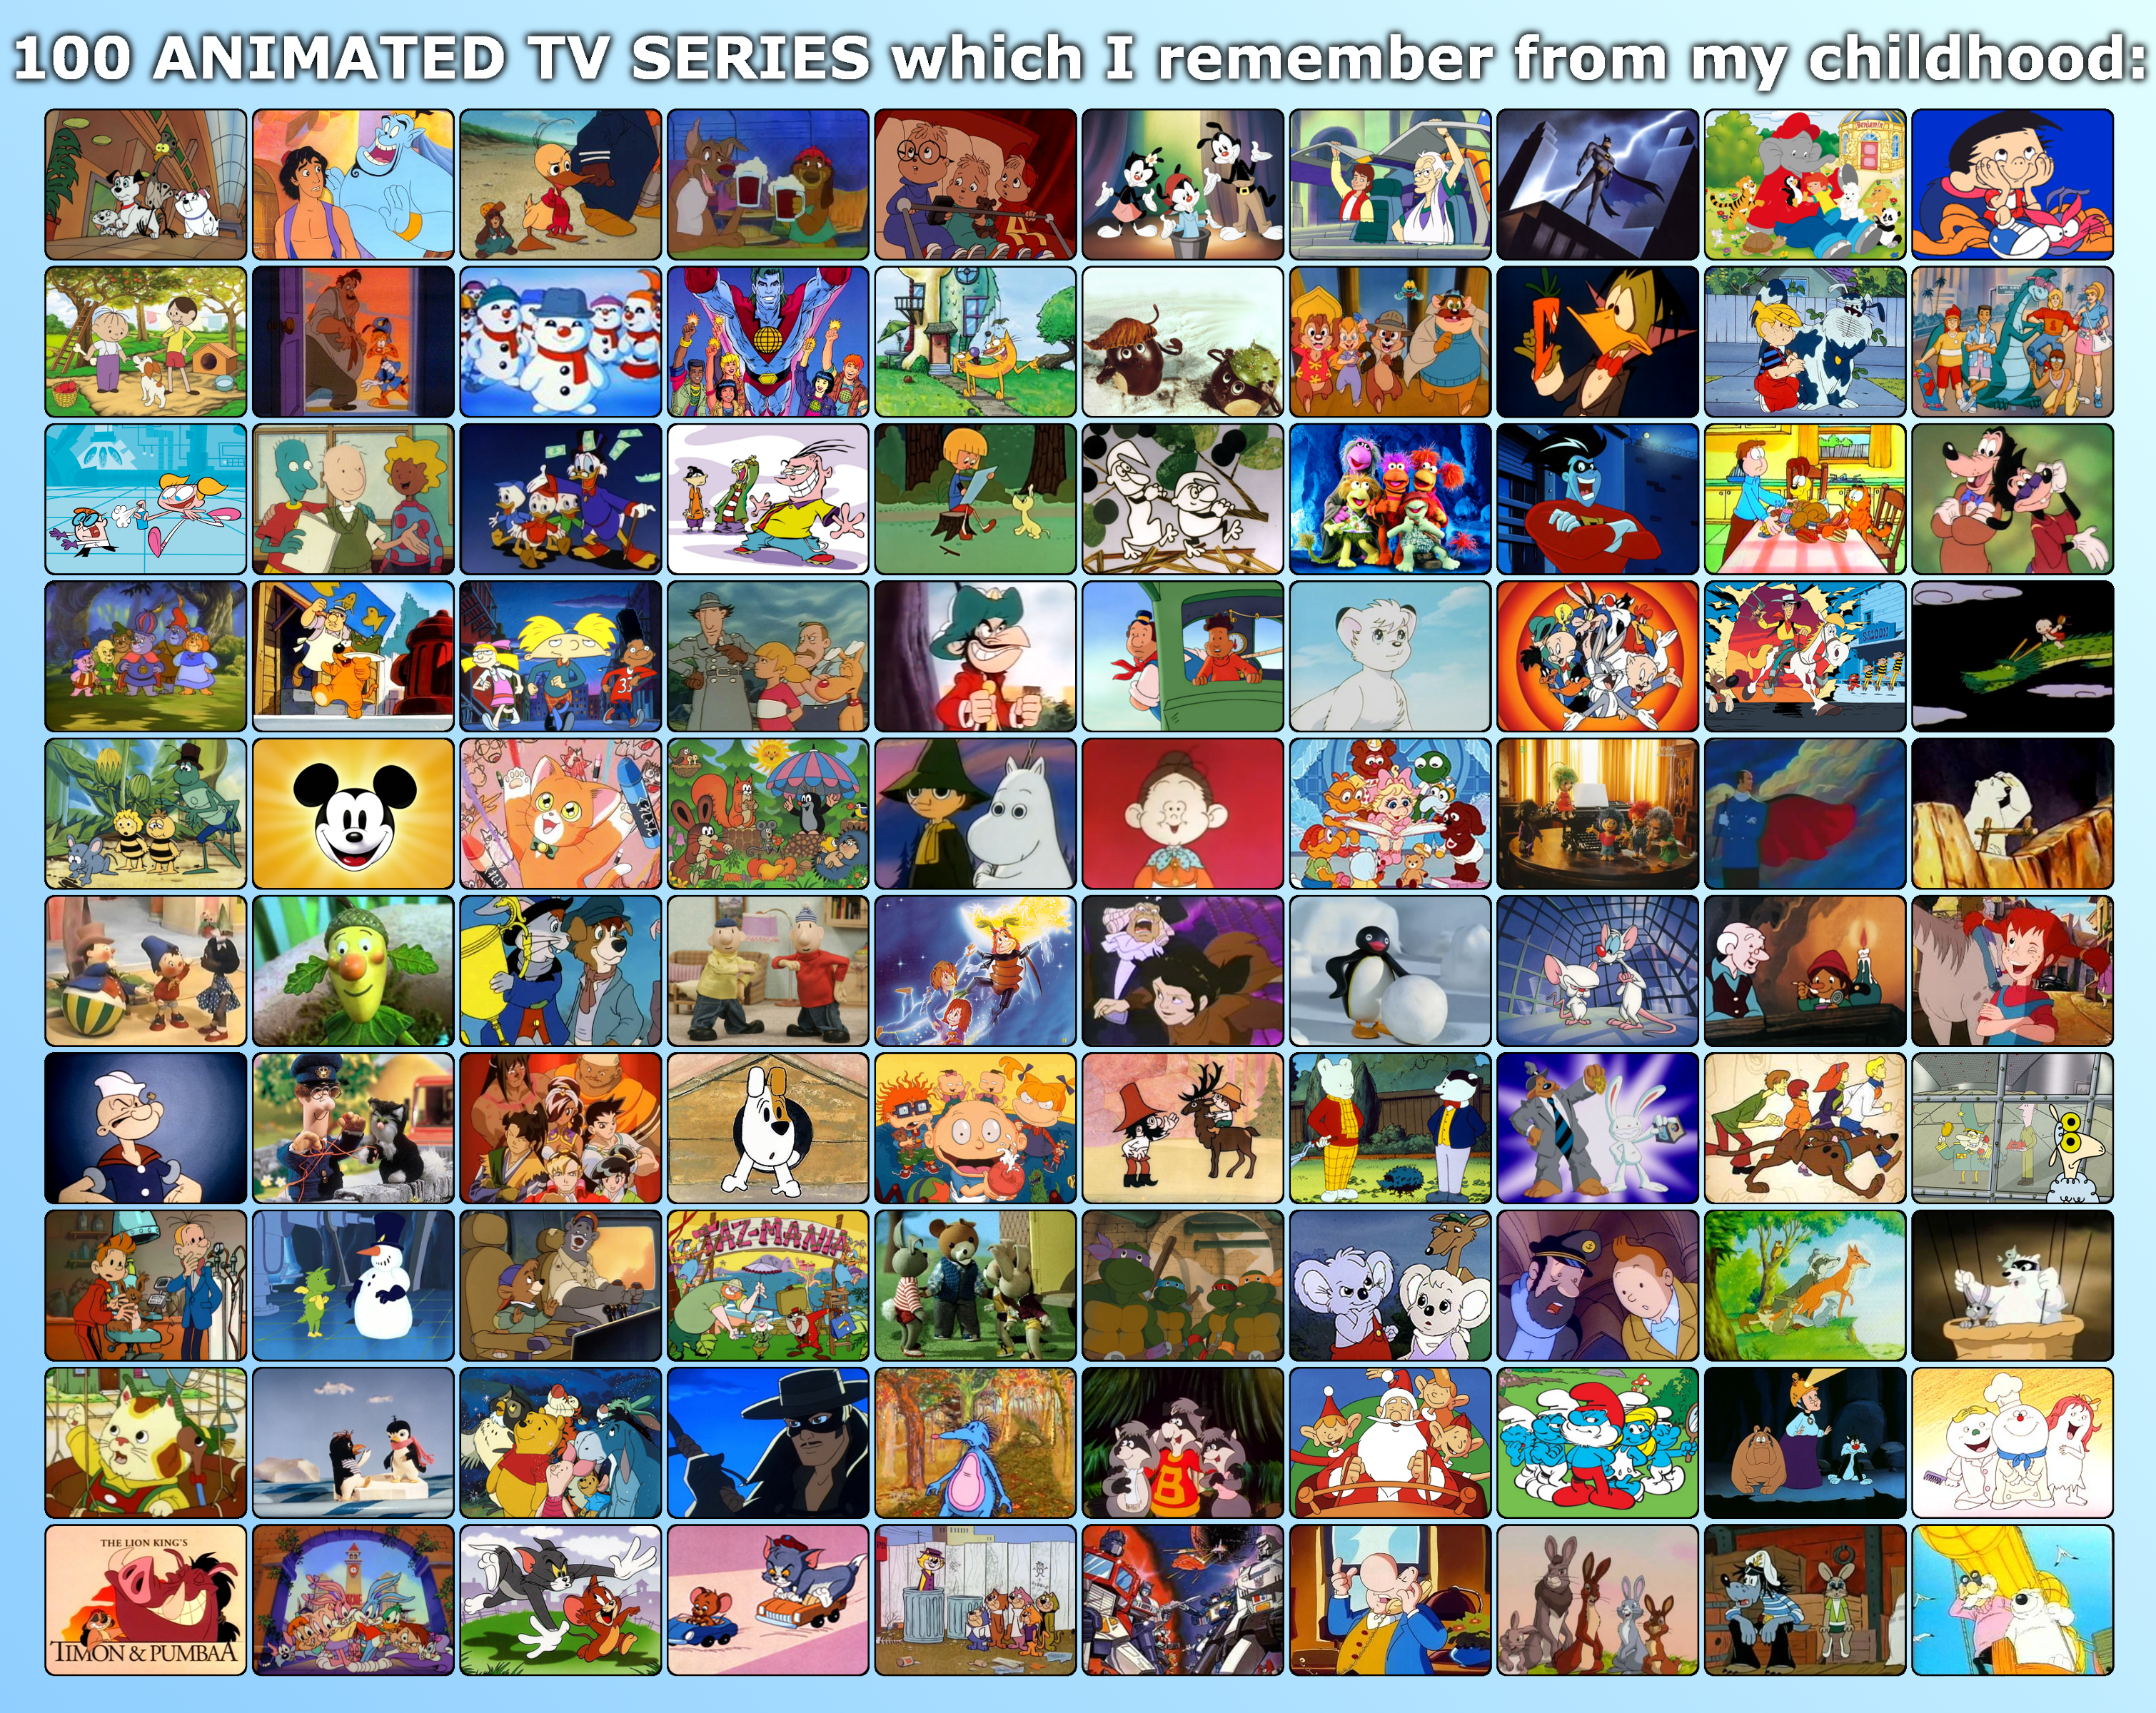 100 animated series I remember from childhood MEME by Adamiro on DeviantArt